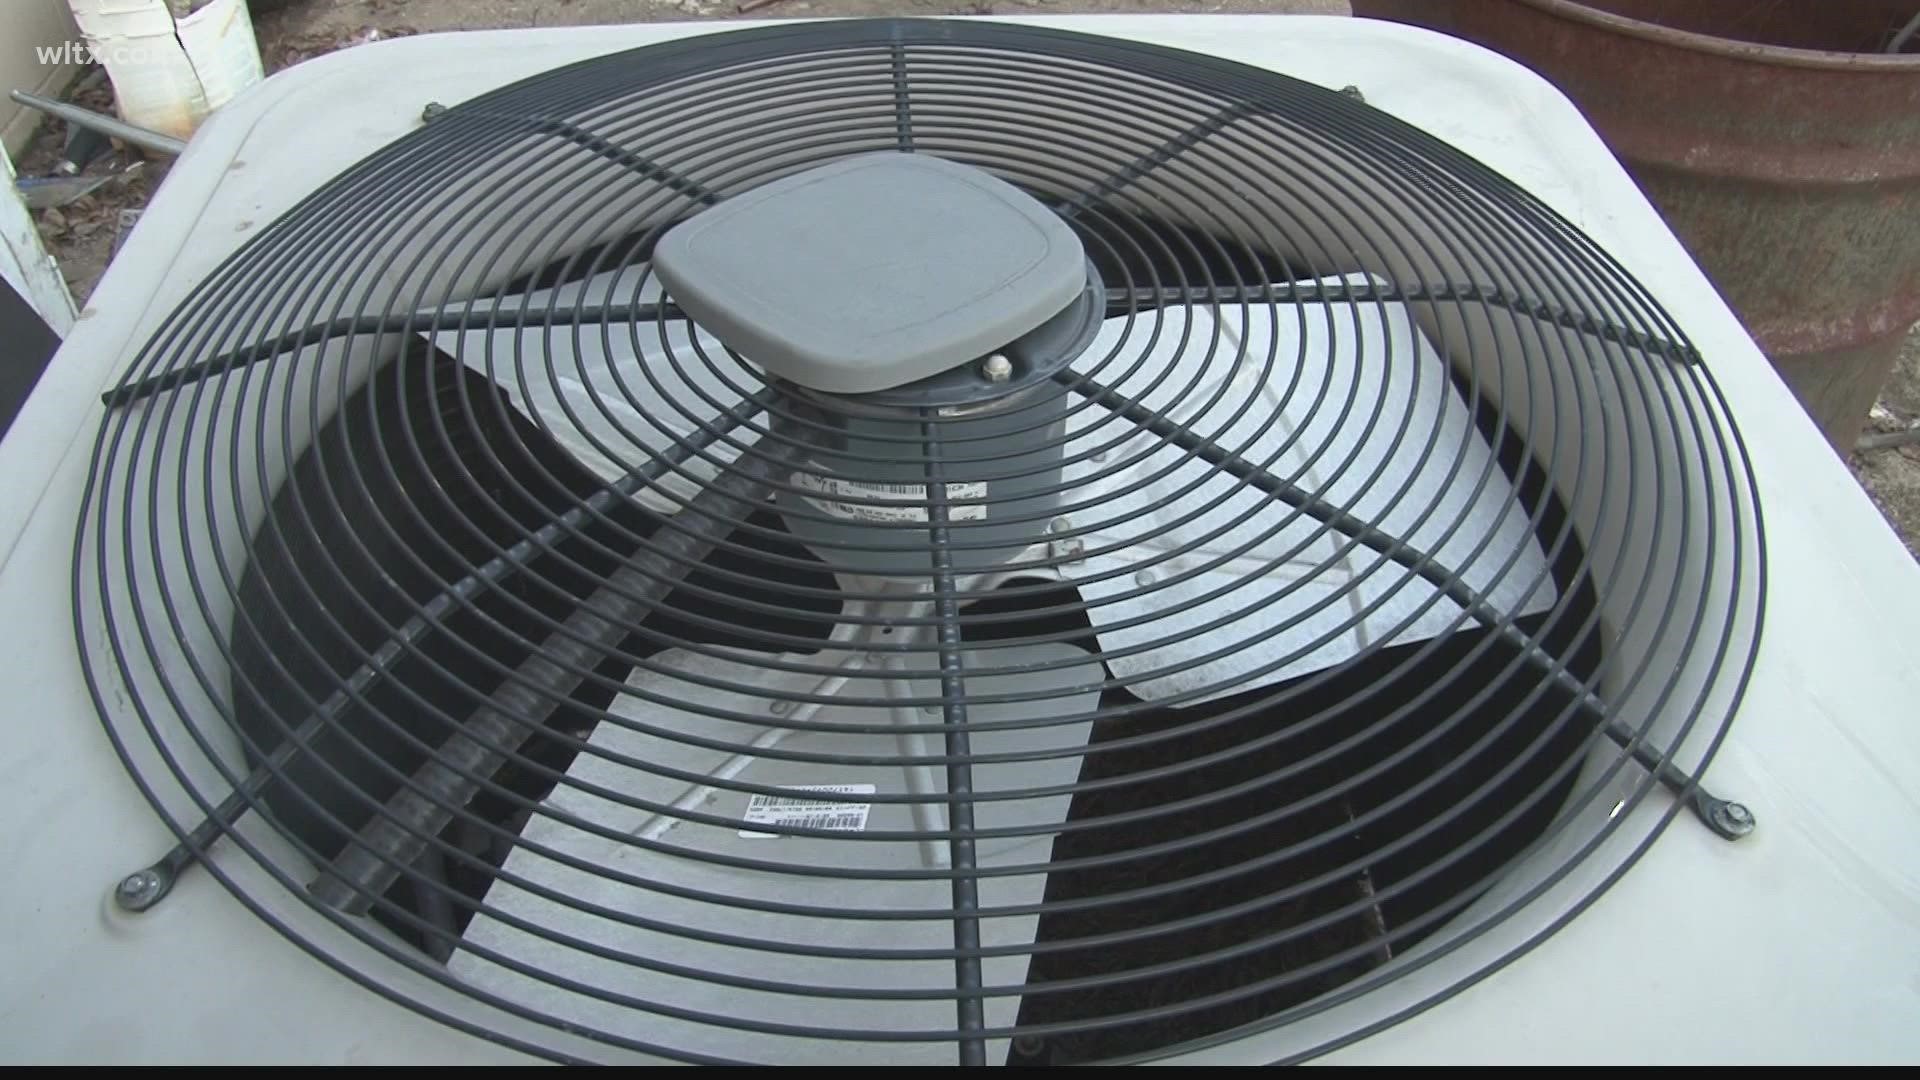 As South Carolina begins a winter cooldown, families are facing issues with their heating units, causing packed schedules for maintenance companies.